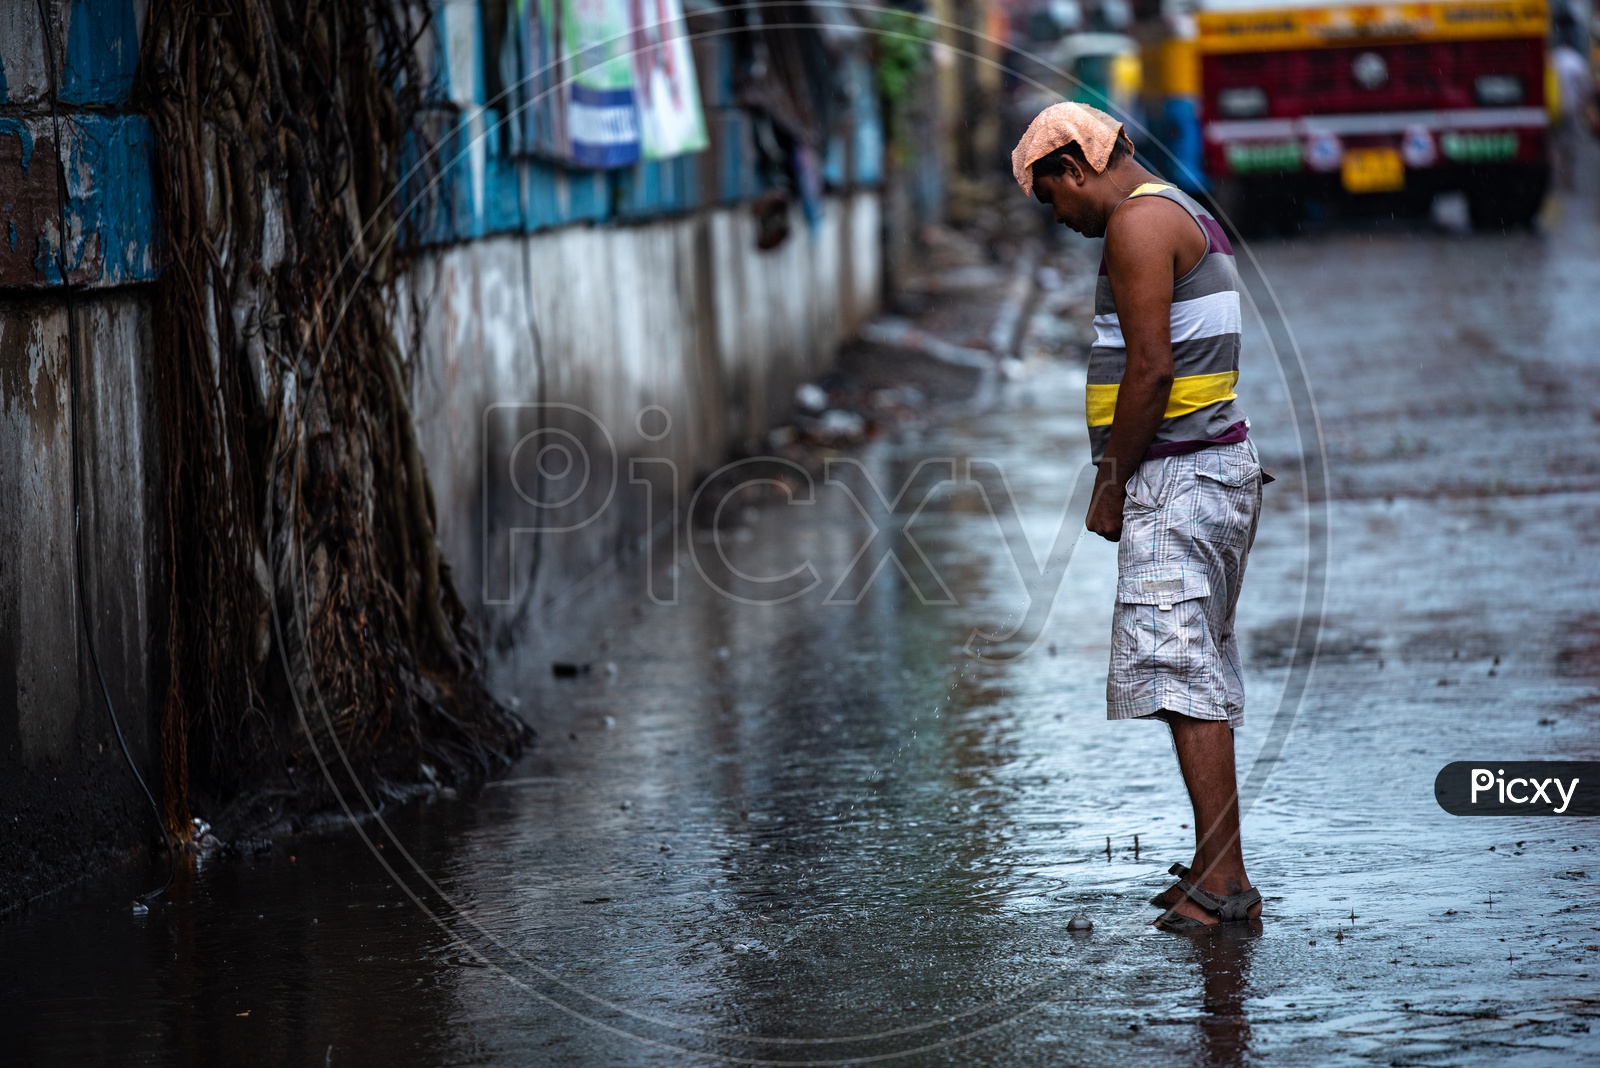 Image Of A Man Peeing Public Urination On Over Flooded Roads In Kolkata Due To Cyclone Fani